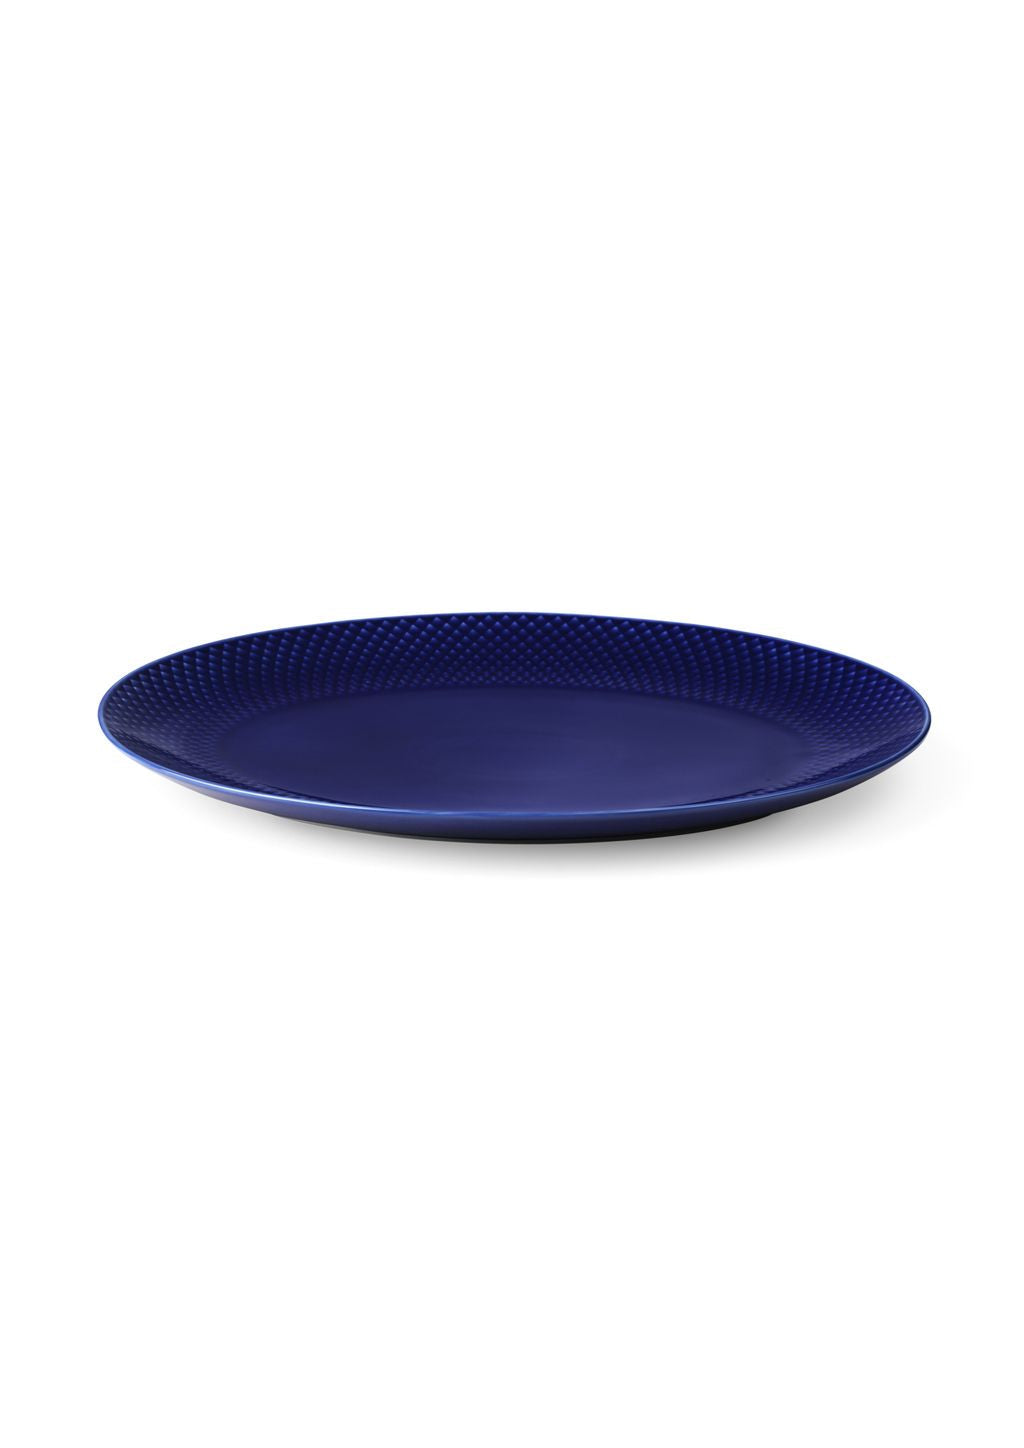 Lyngby Porcelæn Rhombe Color Oval Plate 35x26,5, blu scuro